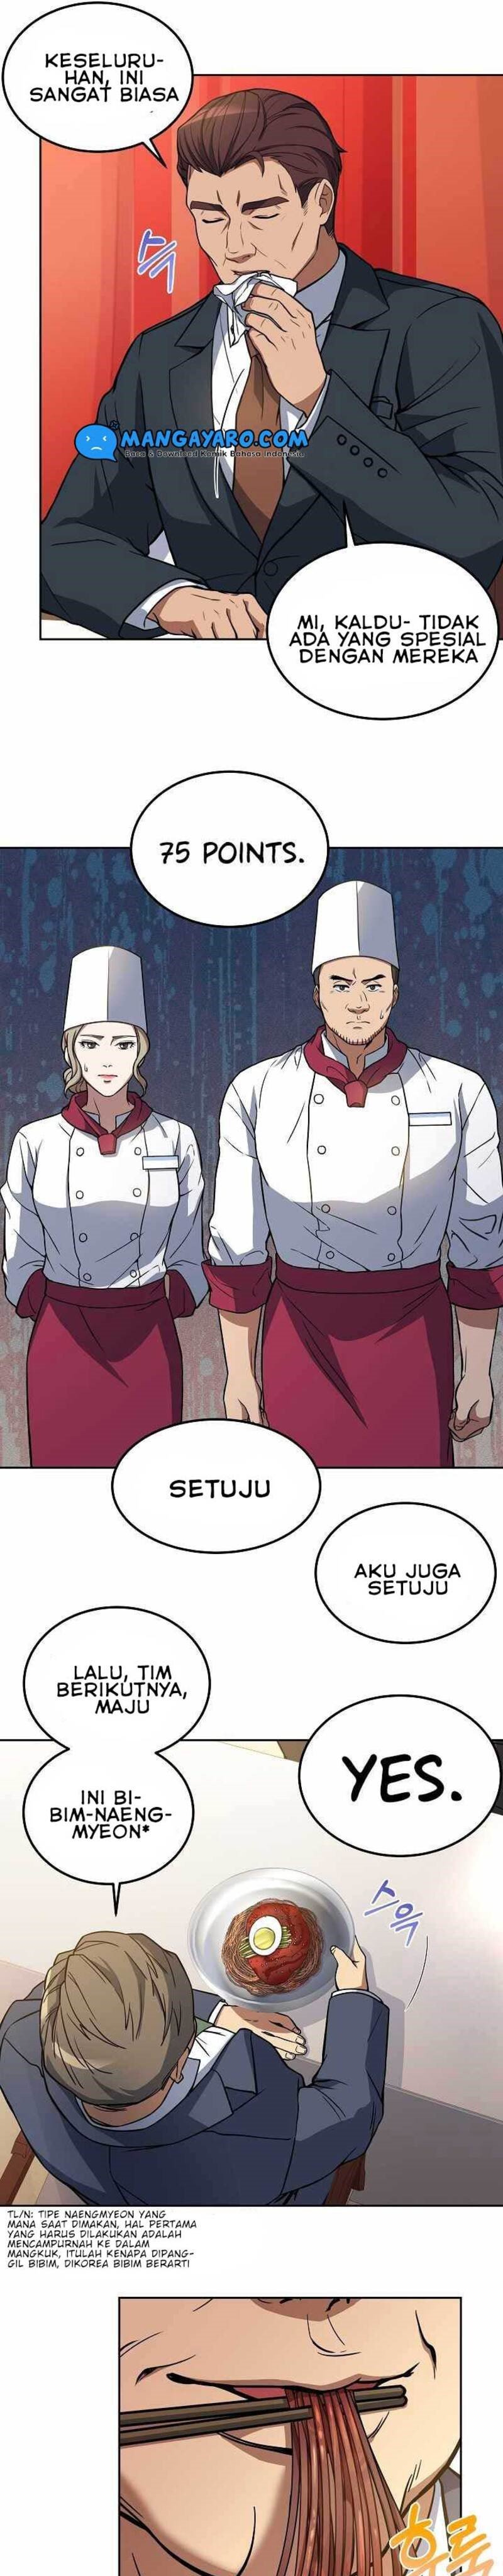 Youngest Chef From the 3rd Rate Hotel Chapter 16